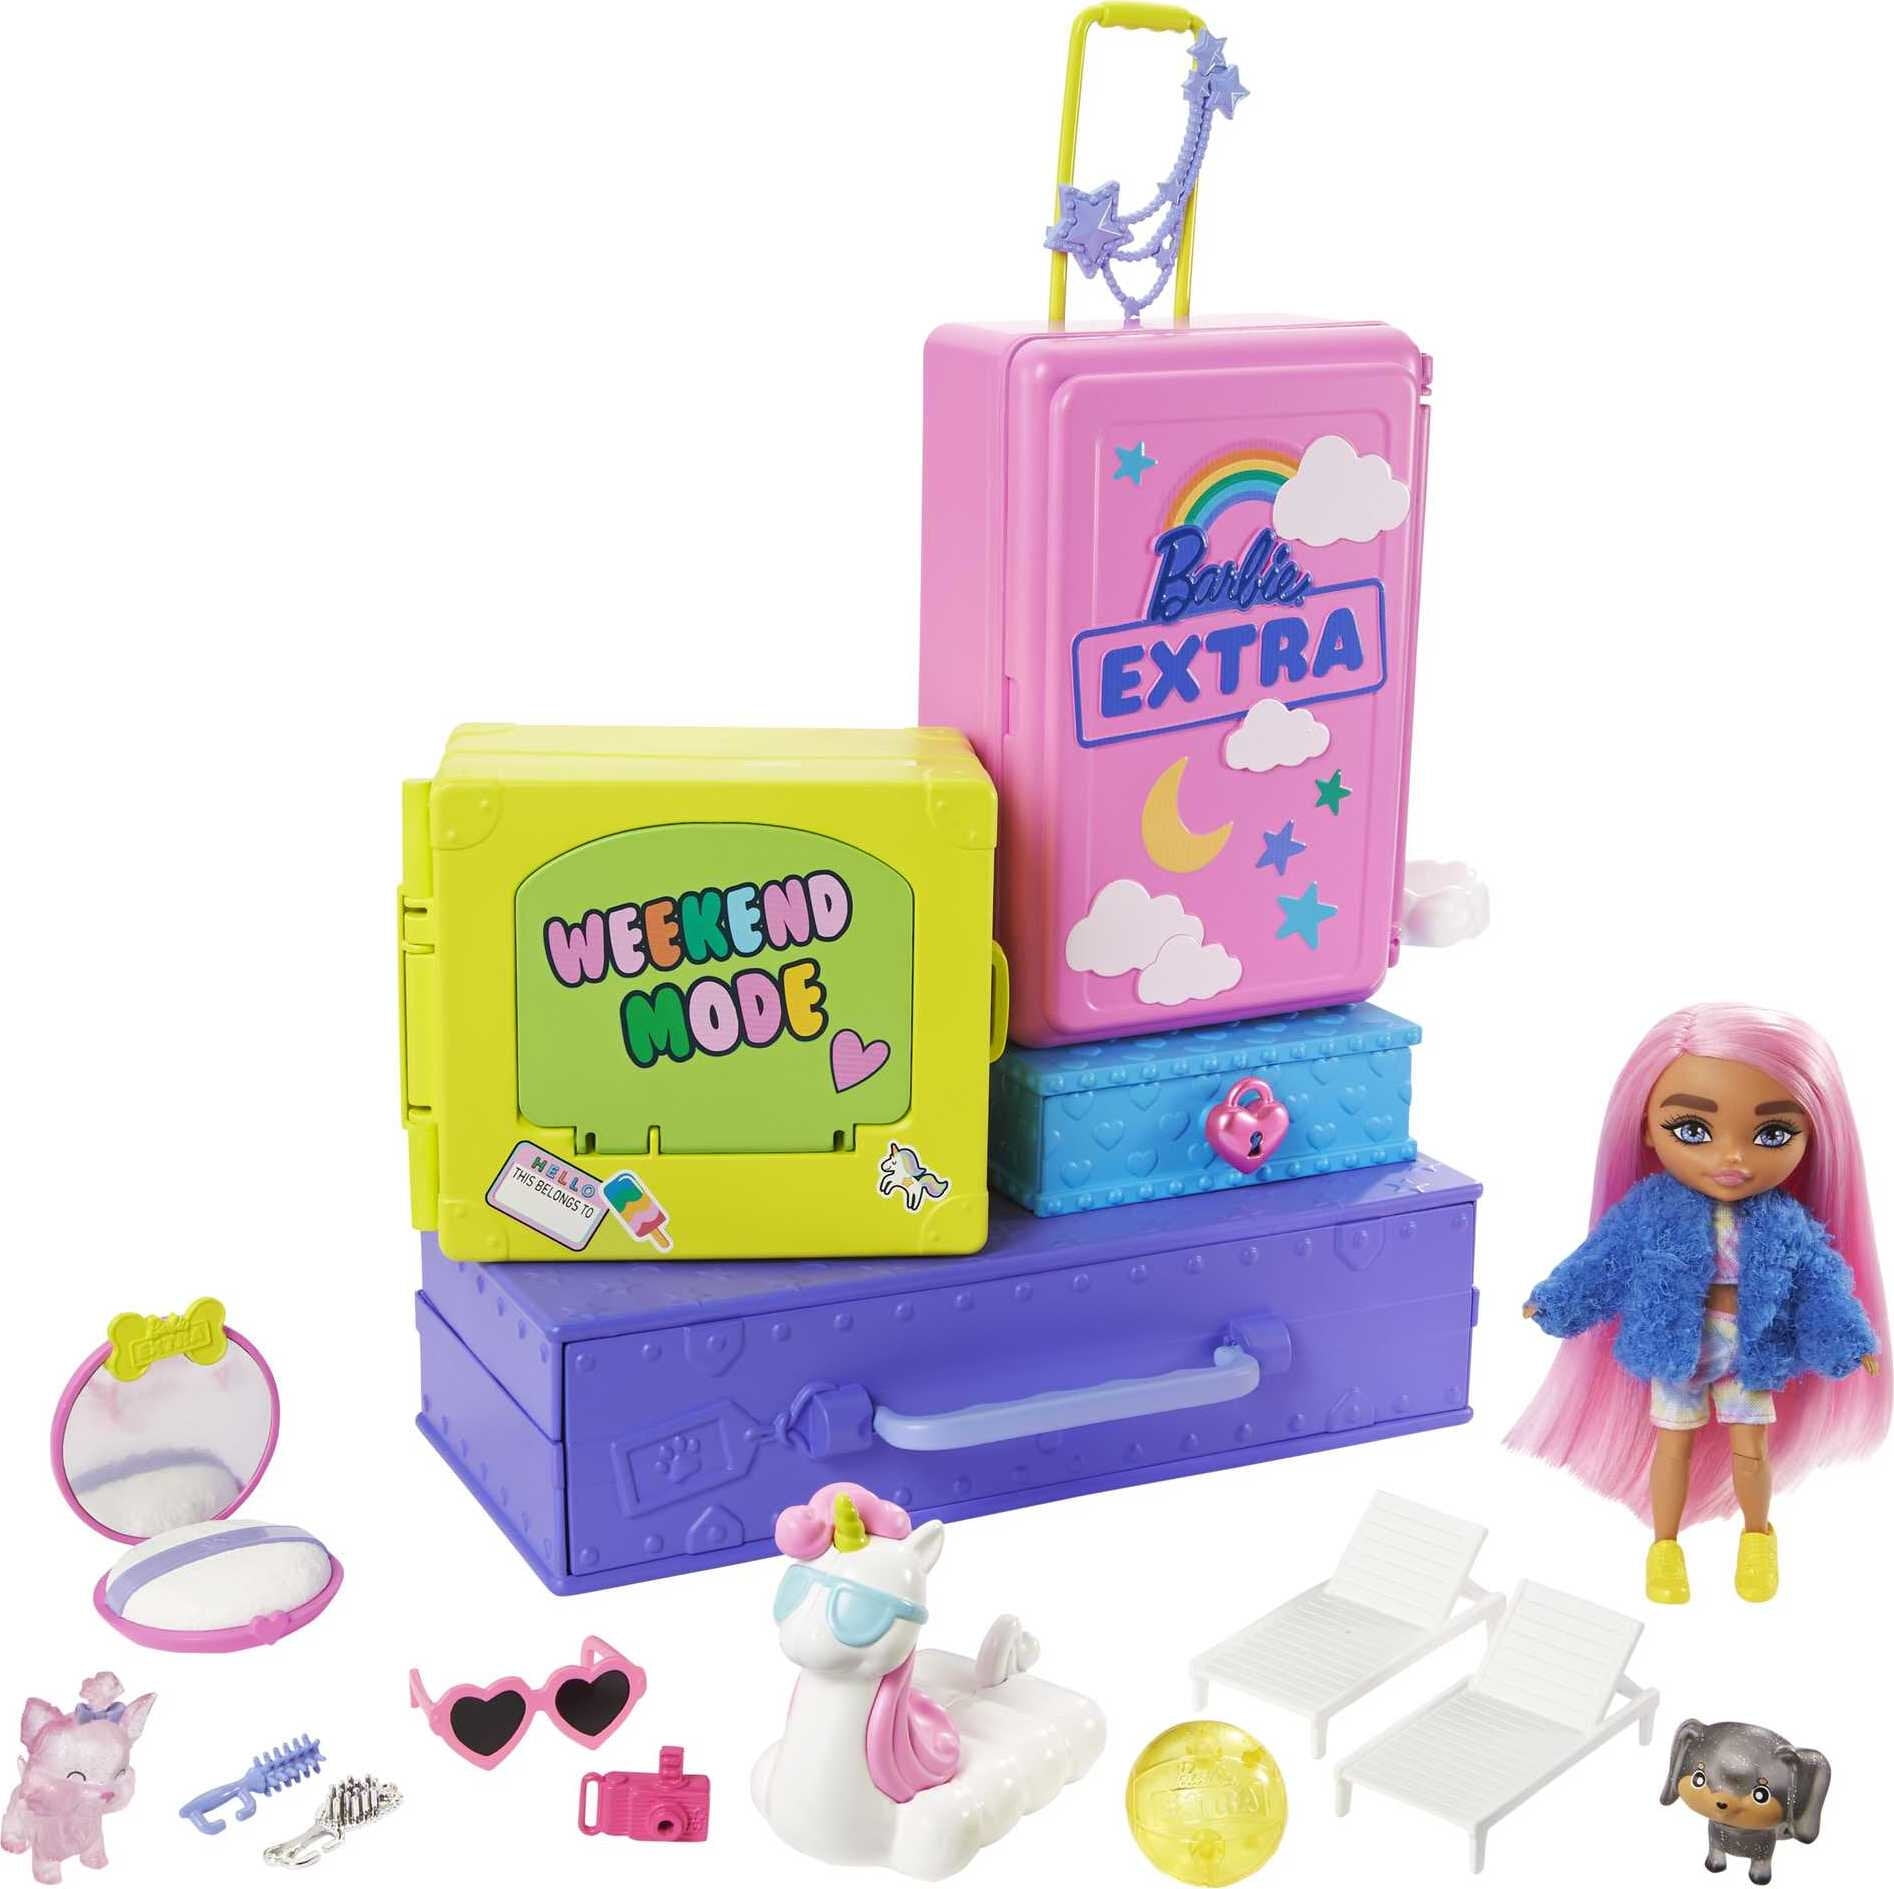 Barbie Extra Minis Pet Dollhouse, Travel Party Playset with Doll